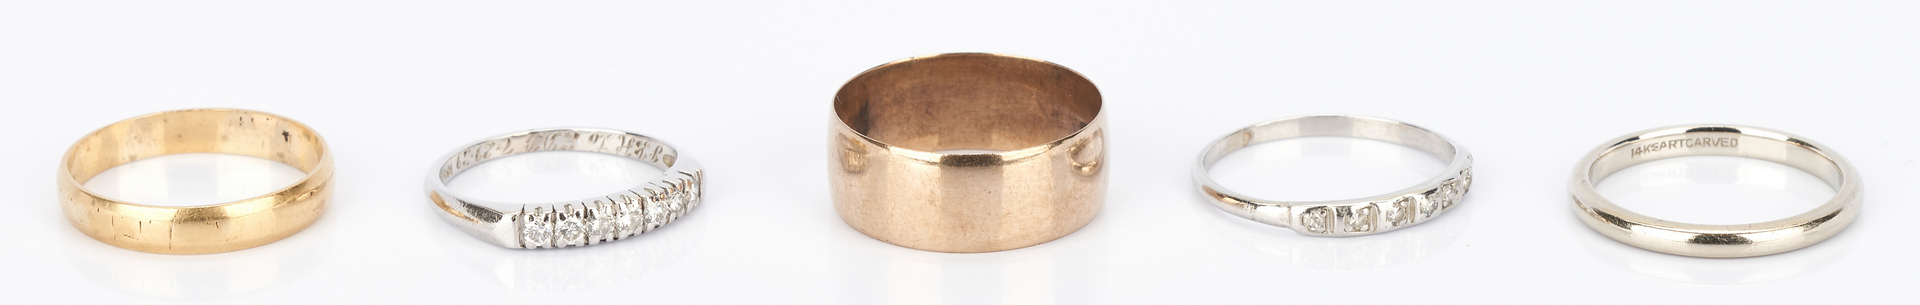 Lot 1037: 5 Gold and Platinum Wedding Rings